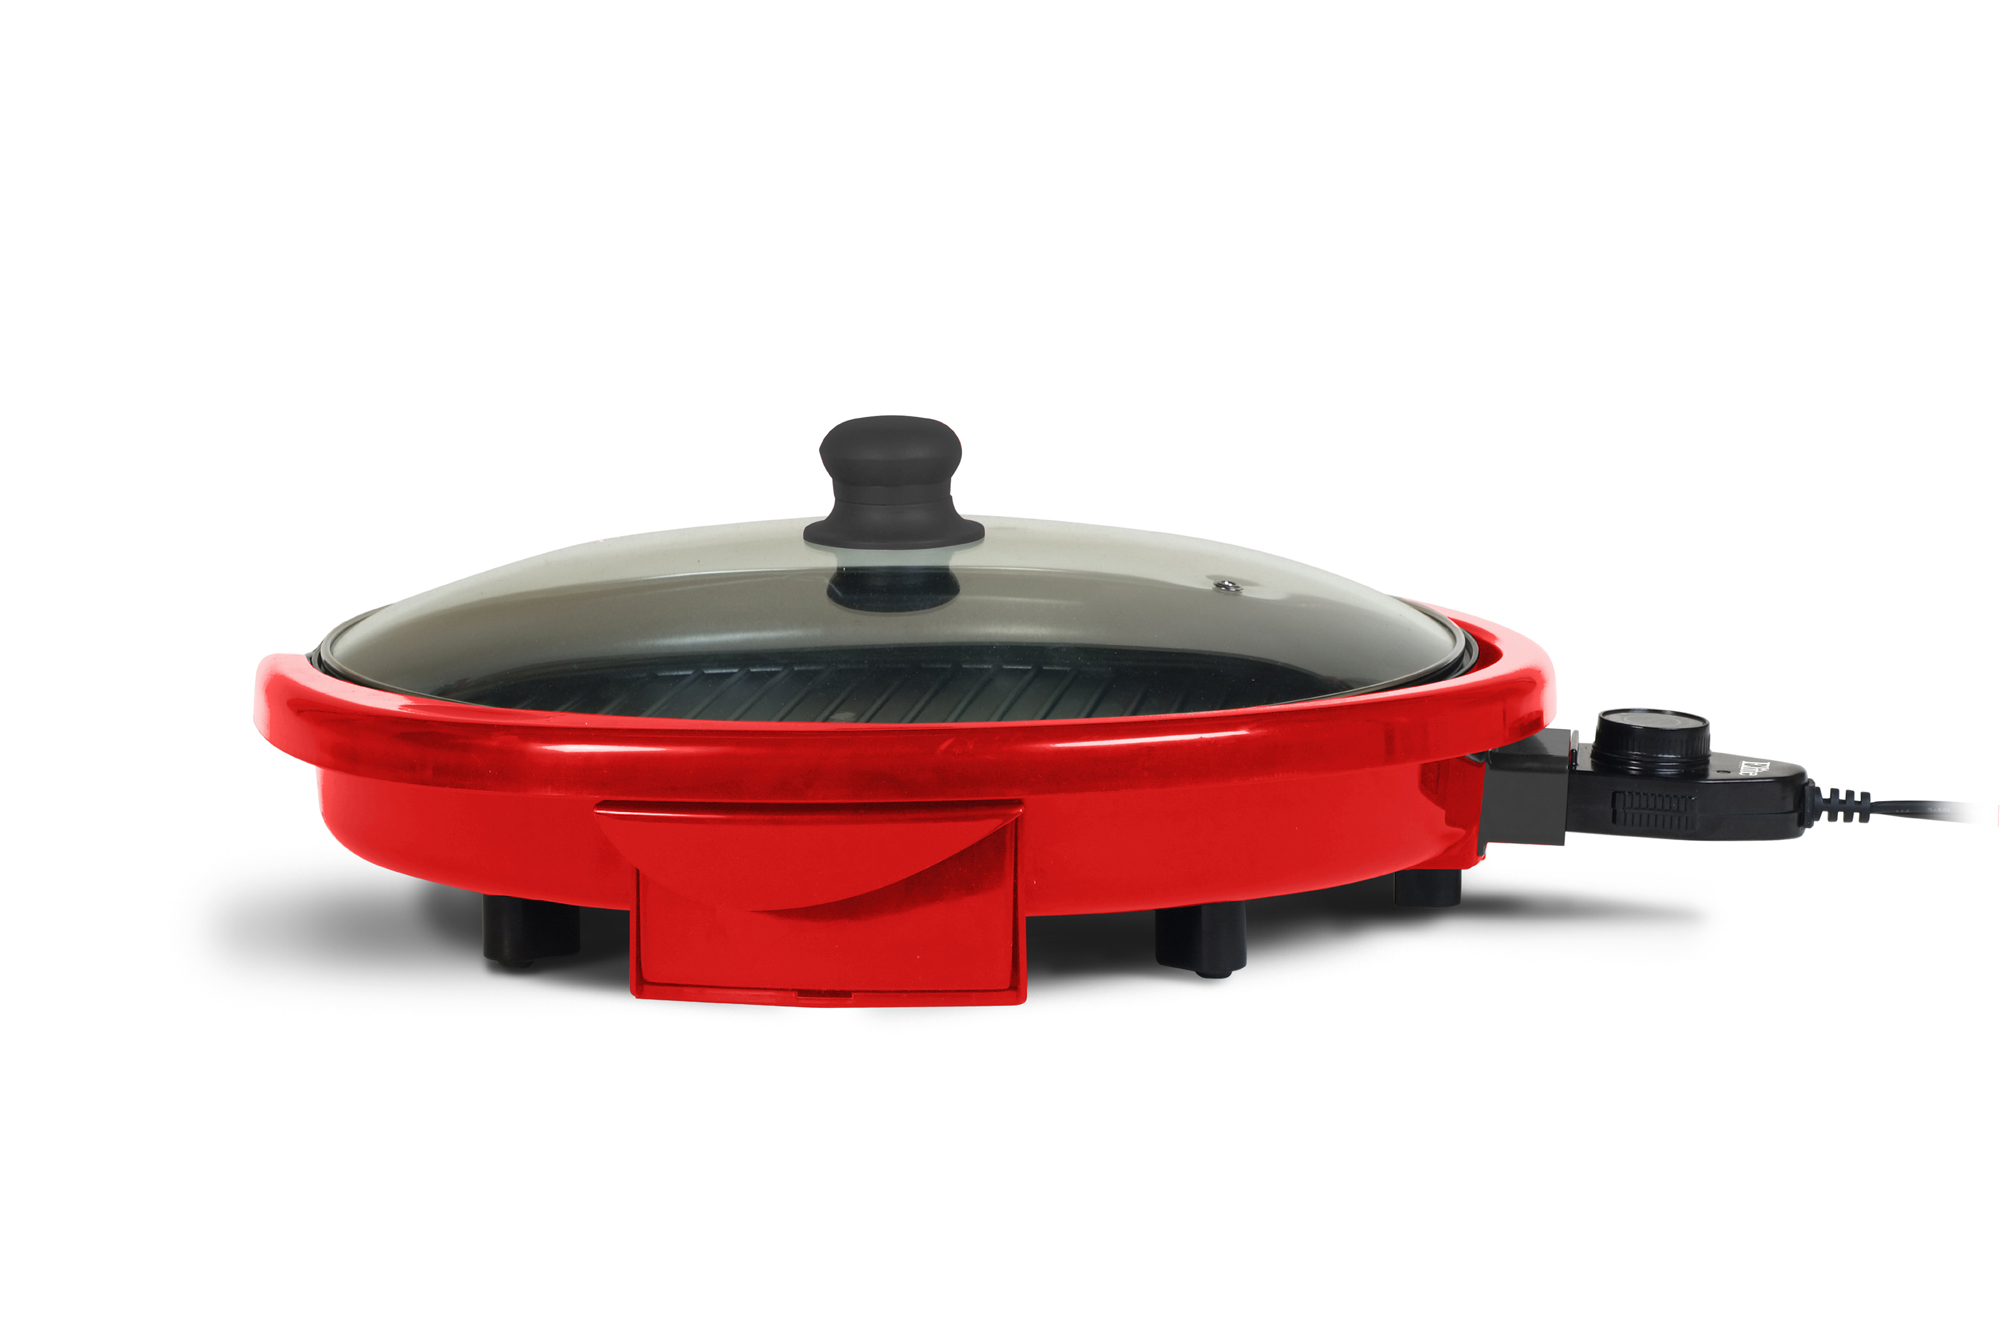 Maxi Matic Elite Gourmet EMG 980R Electric Indoor Grill, 14 Inch, Red